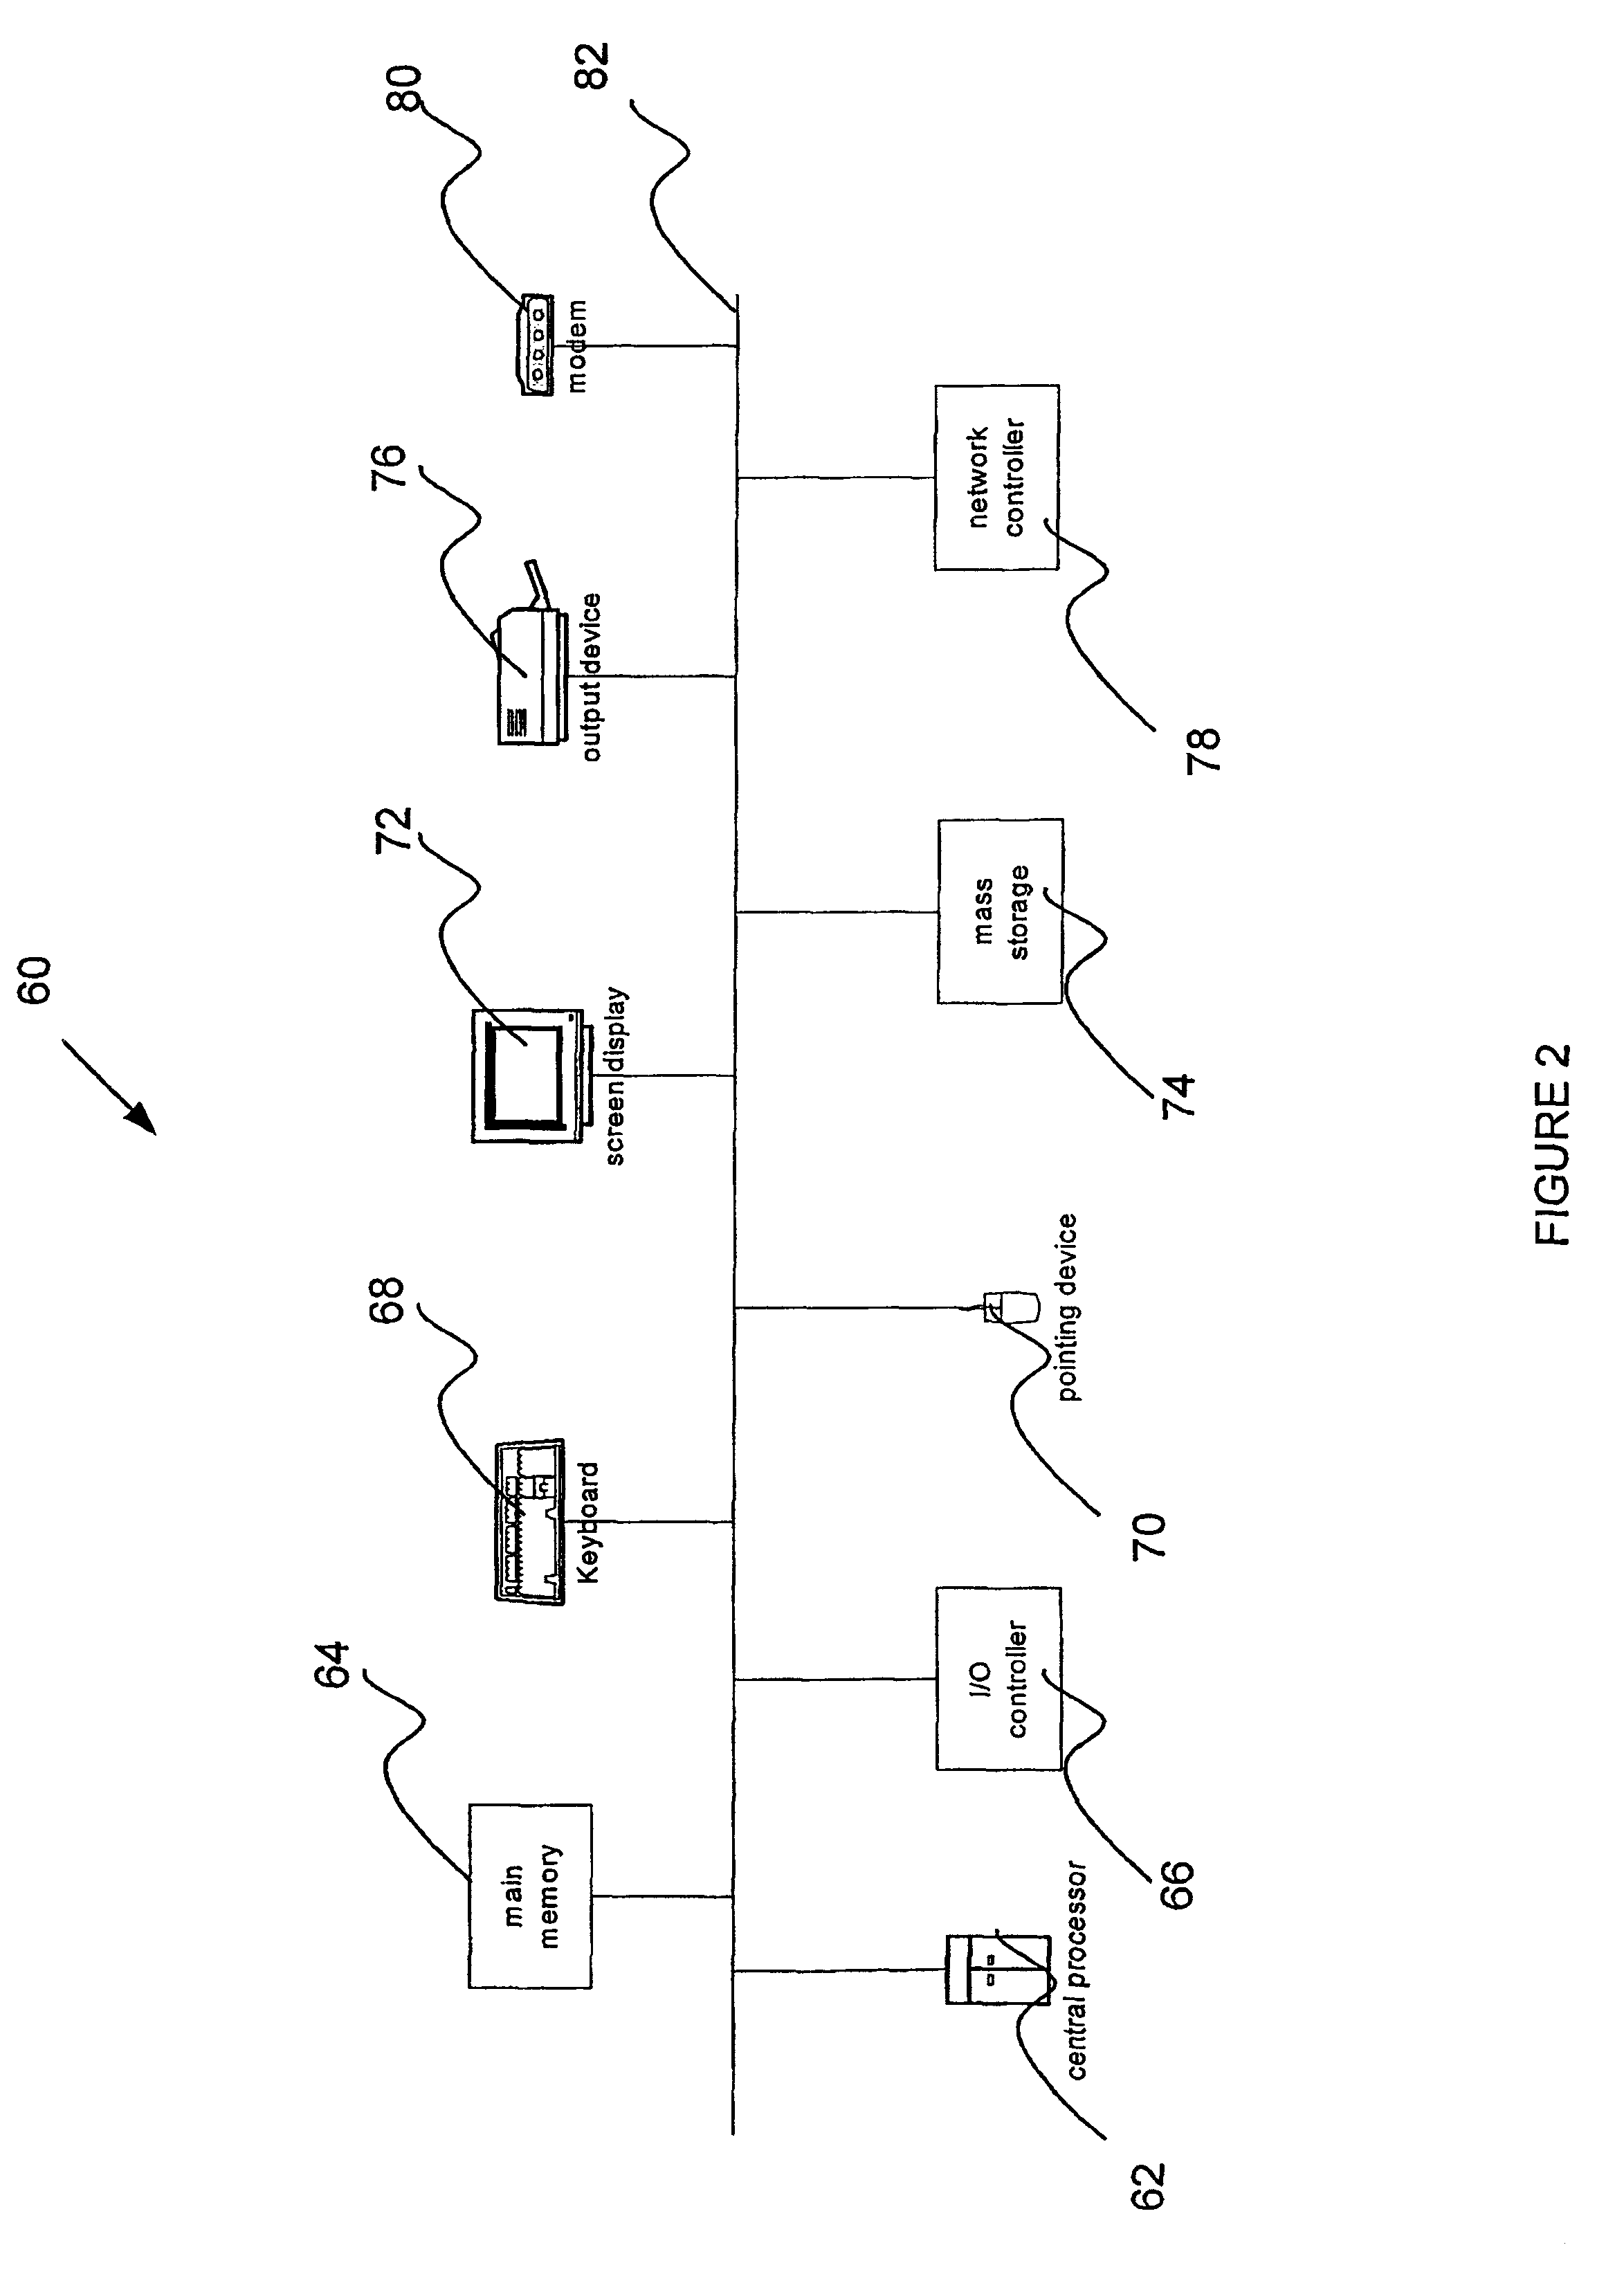 Travel route planner system and method